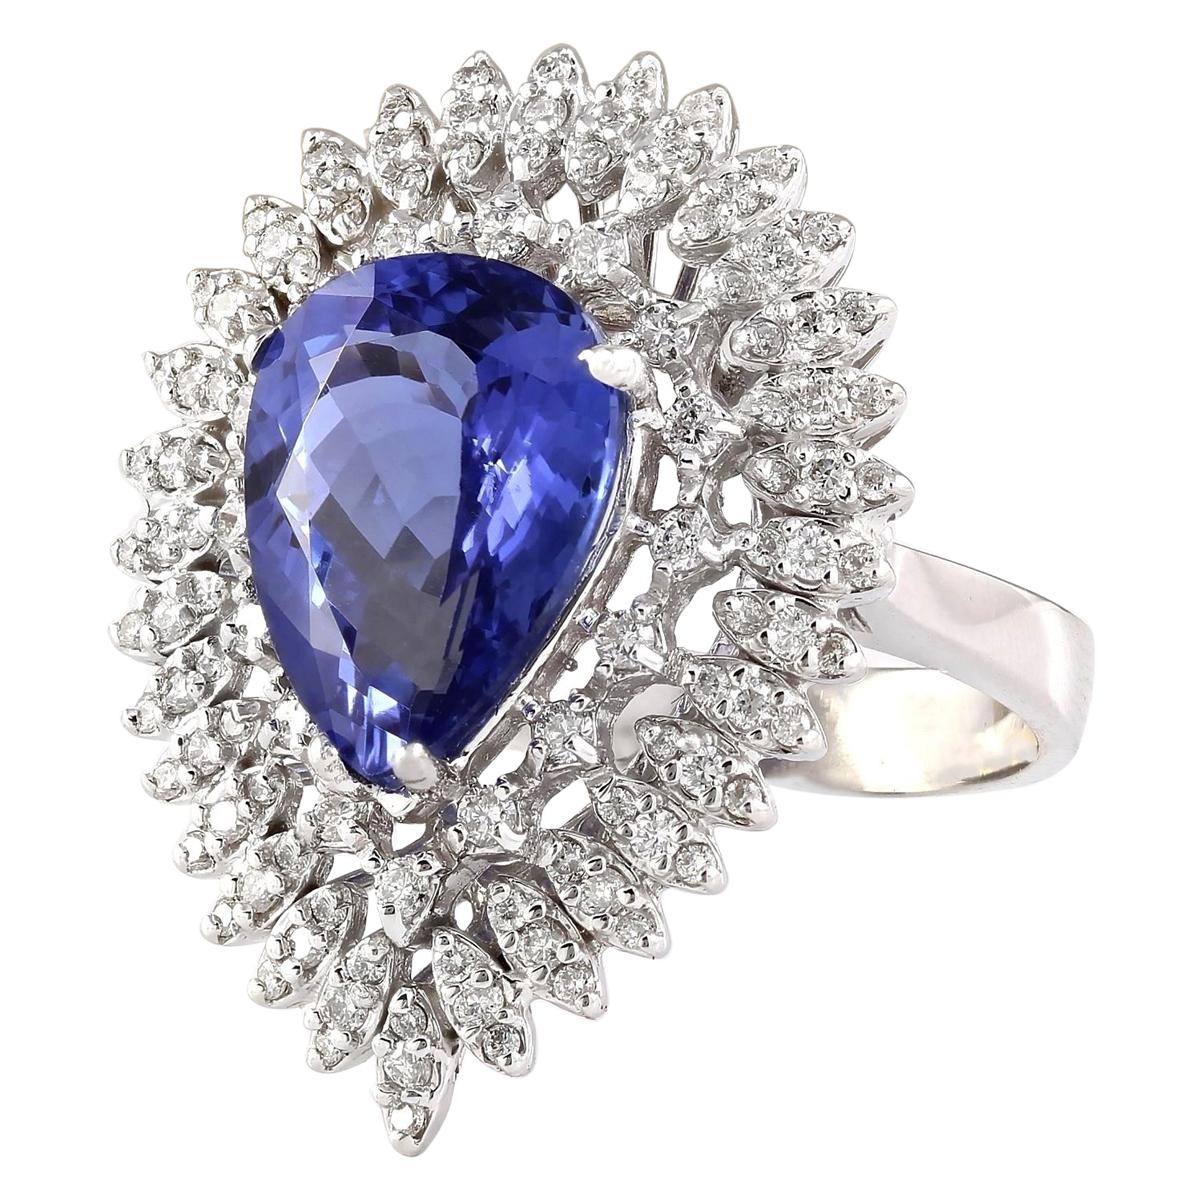 Indulge in luxury and sophistication with our exquisite 7.59 Carat Tanzanite Ring crafted in lustrous 14K White Gold. This opulent piece features a captivating pear-shaped tanzanite, weighing 6.09 carats and measuring 14.00x10.00 mm. Adorning the